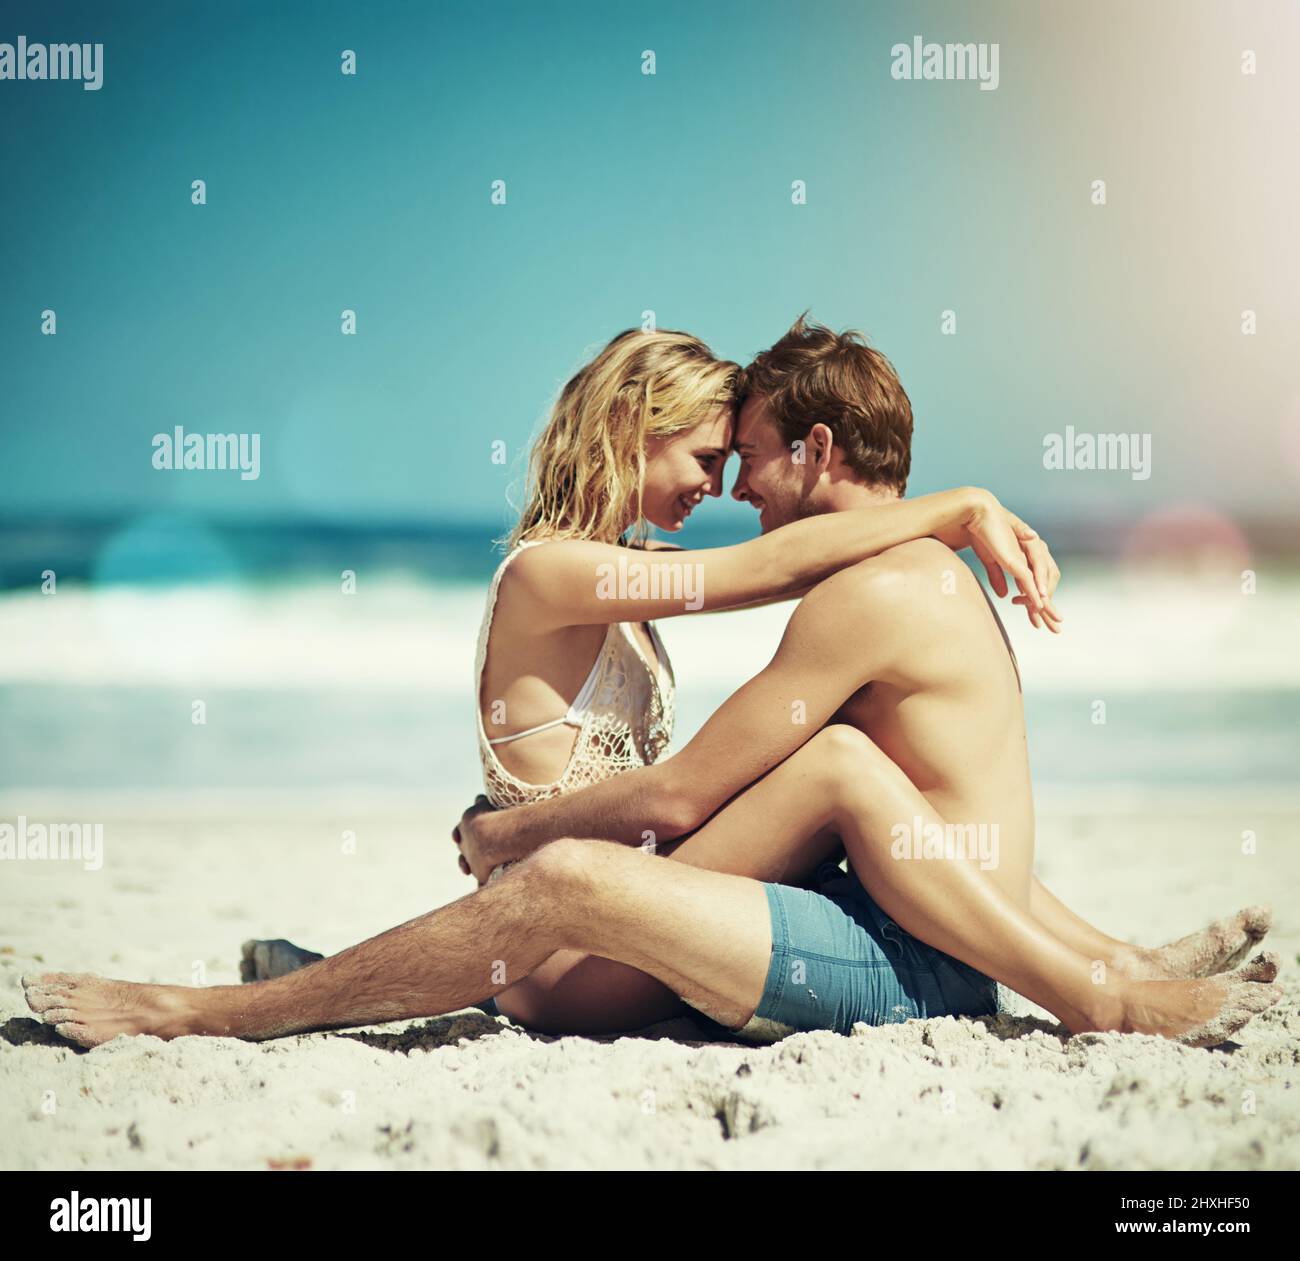 Falling even deeper in love. Full length shot of an affectionate young couple sitting face to face on the beach. Stock Photo